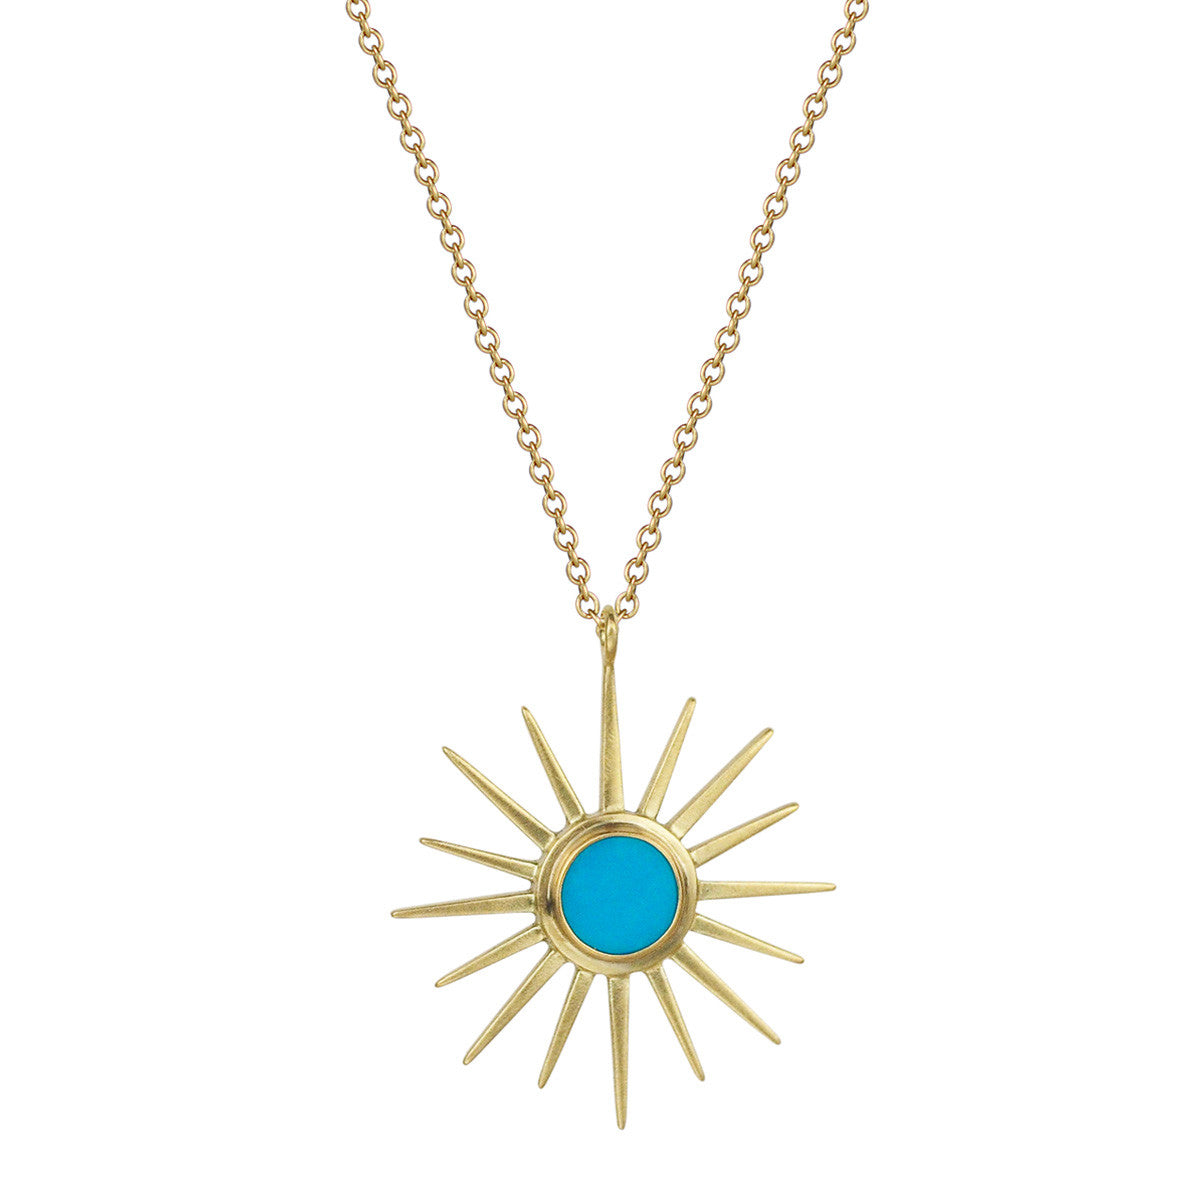 18K Gold Sun Pendant with Turquoise Center